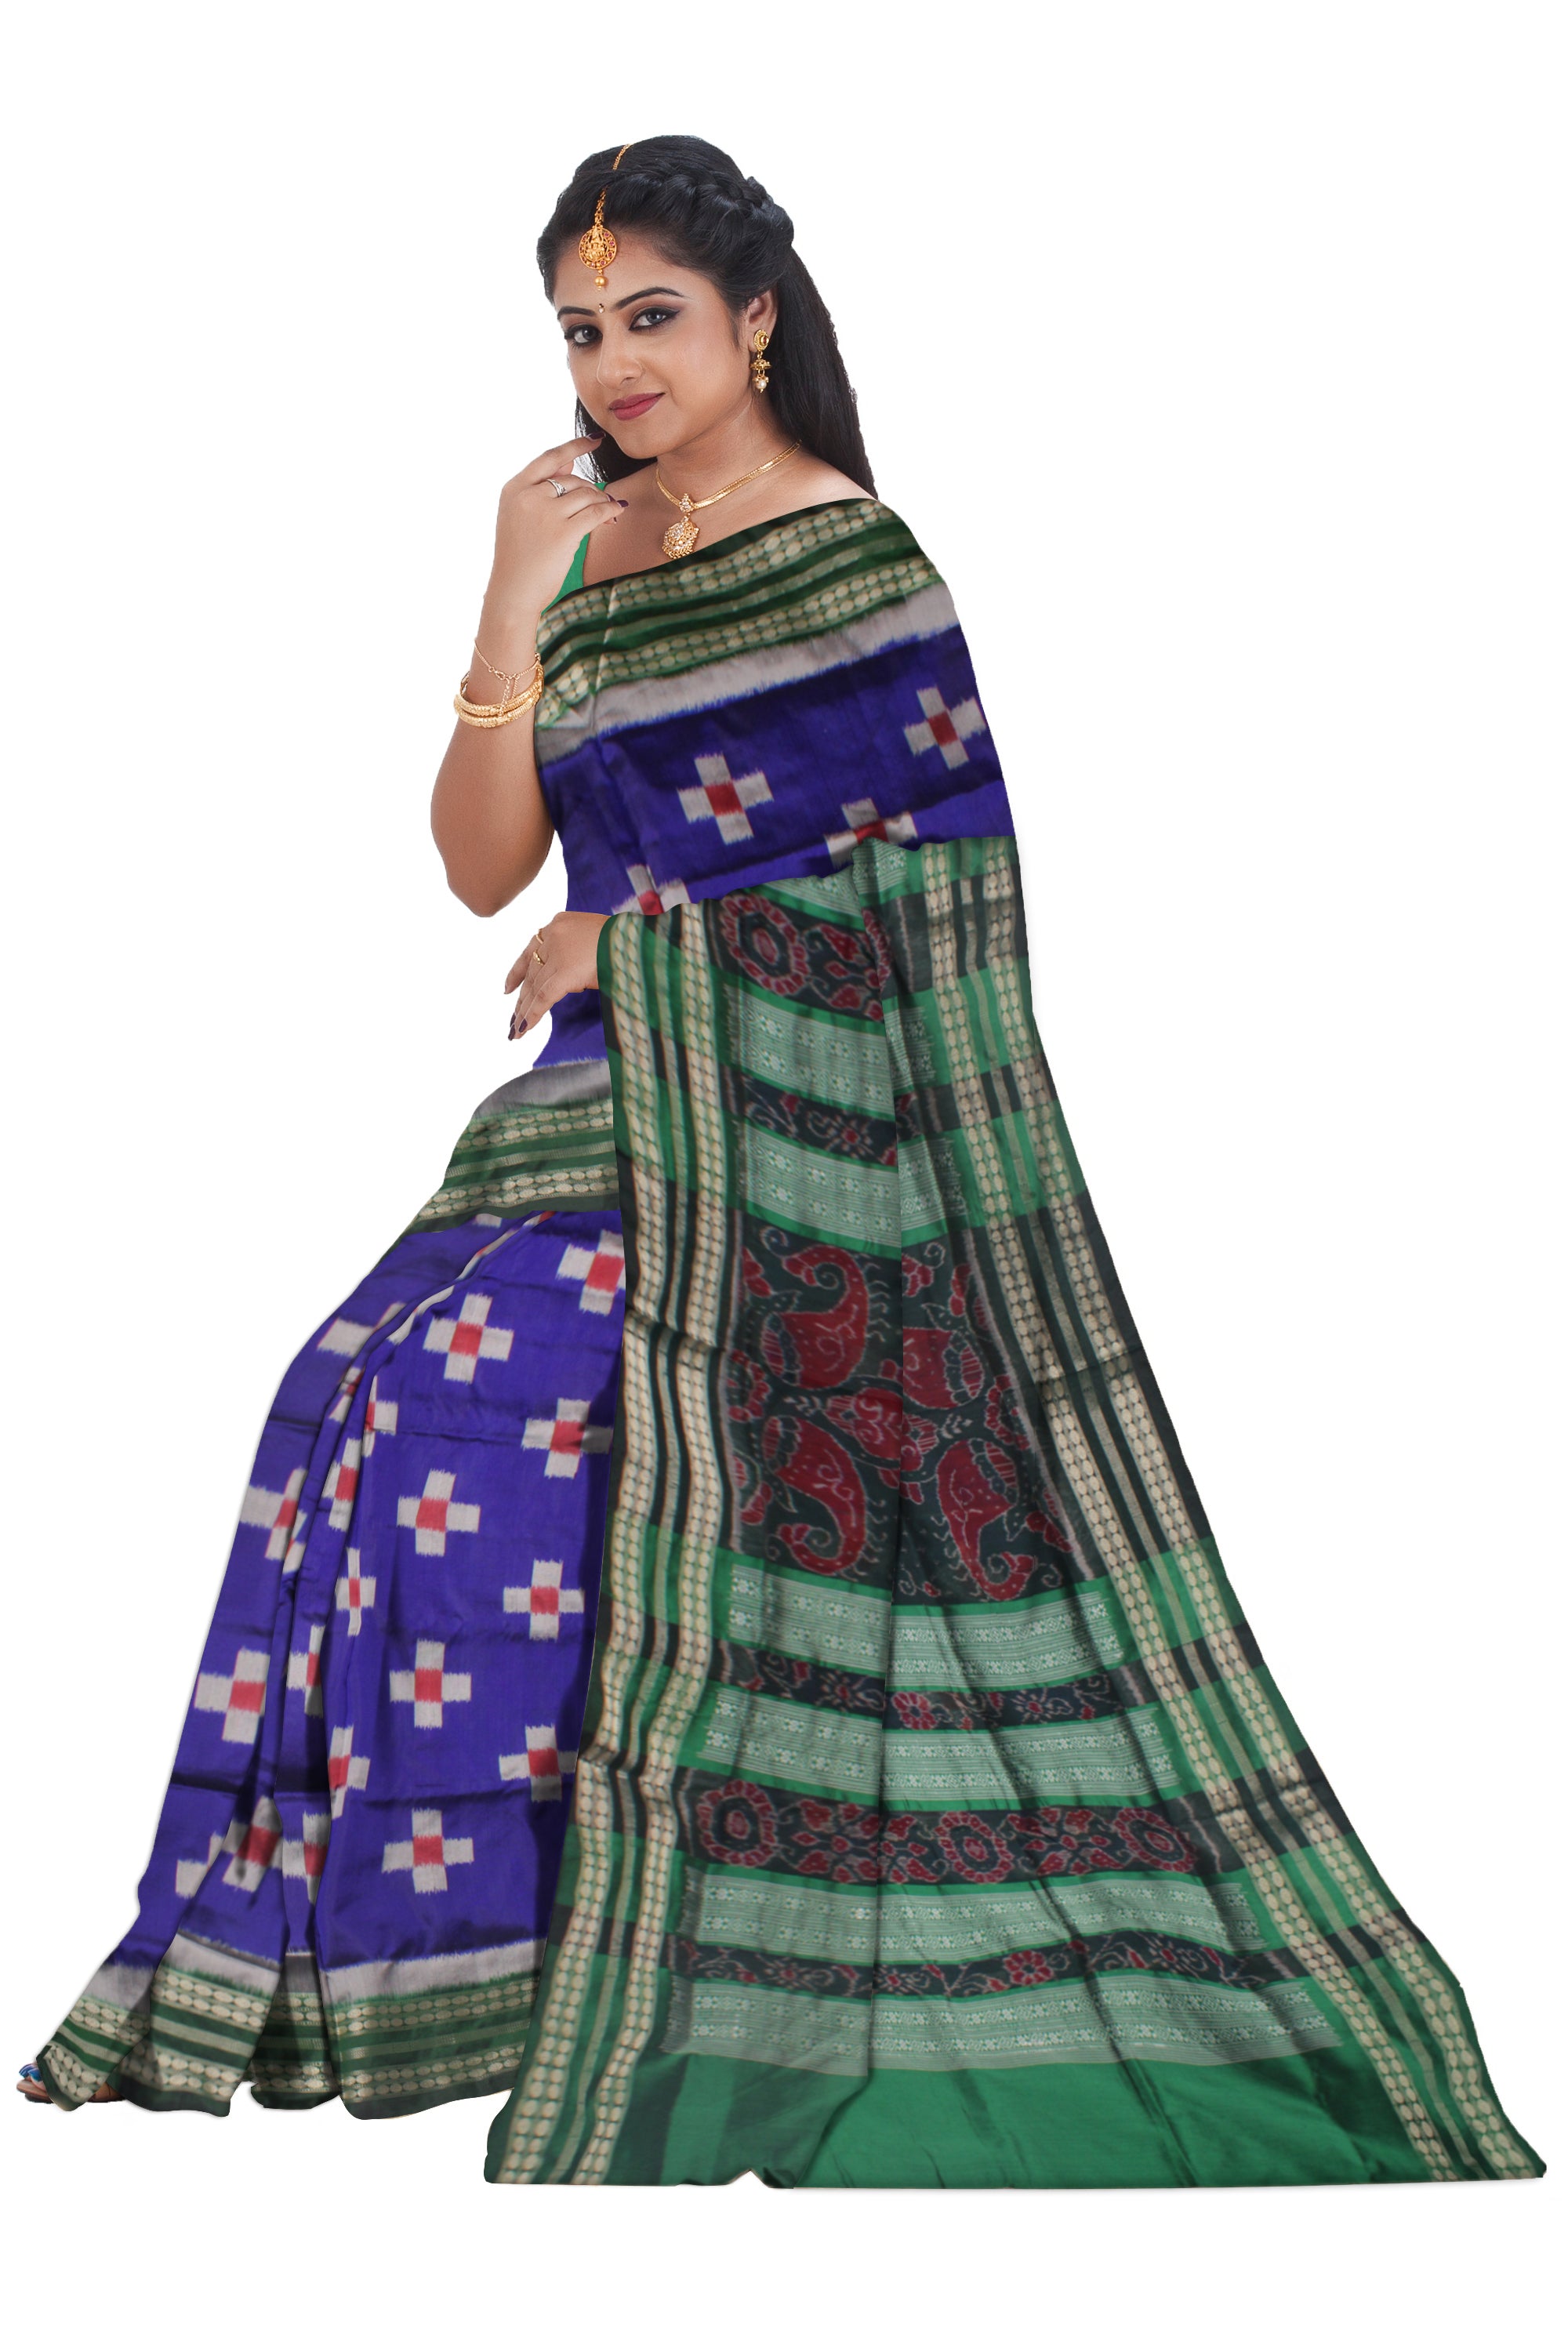 BEST SELLING TARA PATTERN PATA SAREE IS BLUE AND GREEN COLOR BASE,COMES WITH MATCHING BLOUSE PIECE. - Koshali Arts & Crafts Enterprise